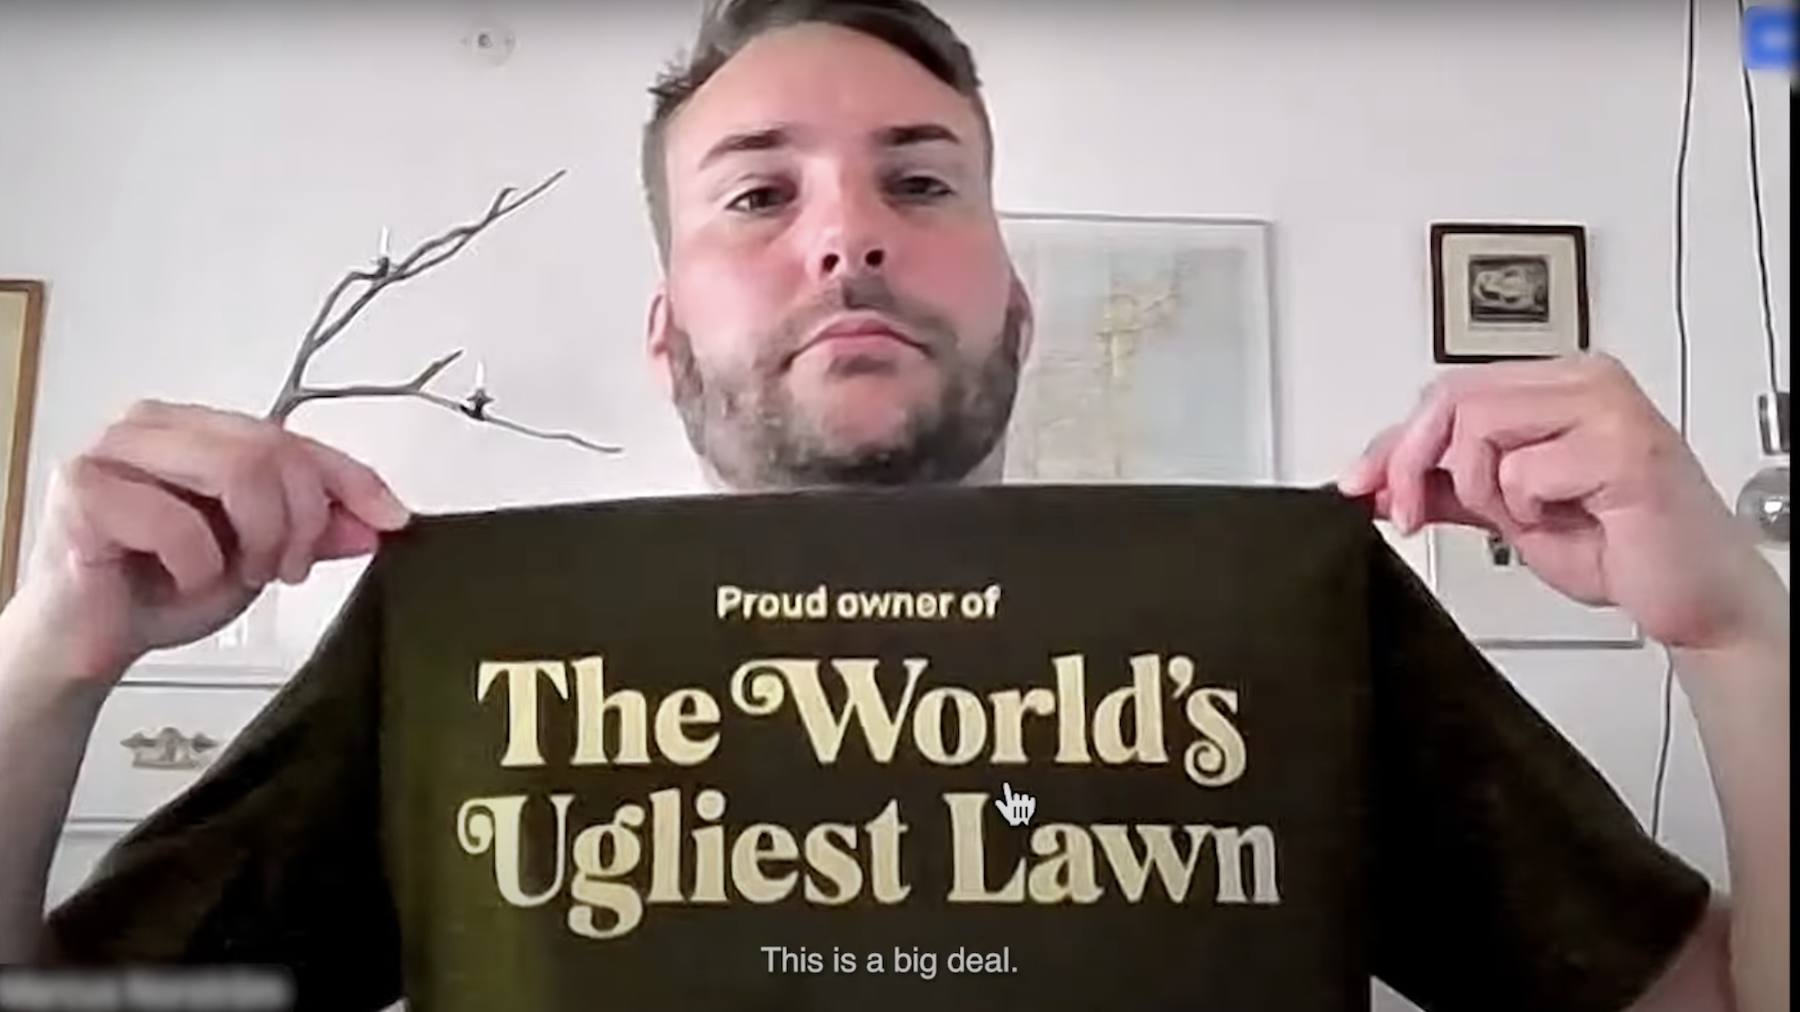 winner of the ugliest lawn in the world tshirt